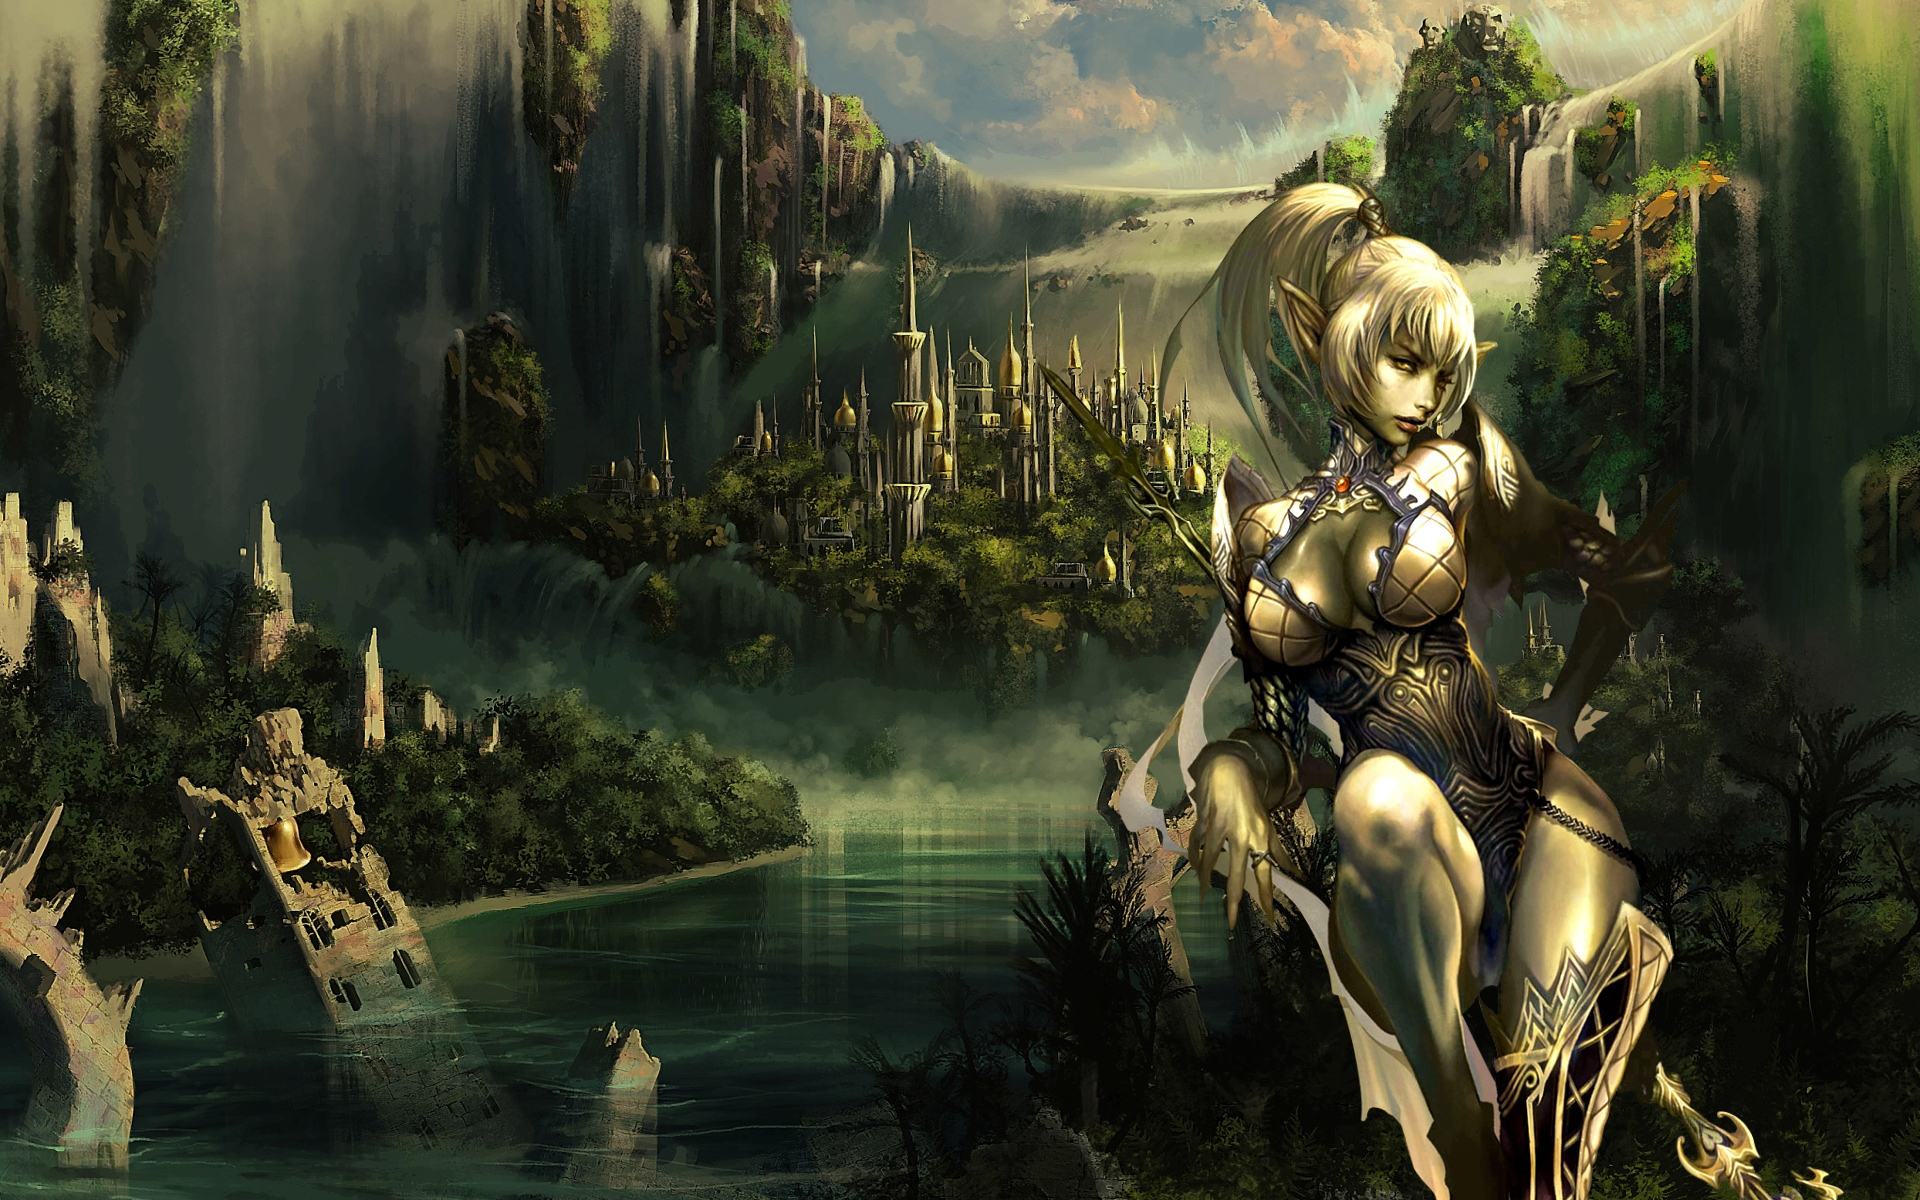 Video Game Lineage HD Wallpaper | Background Image